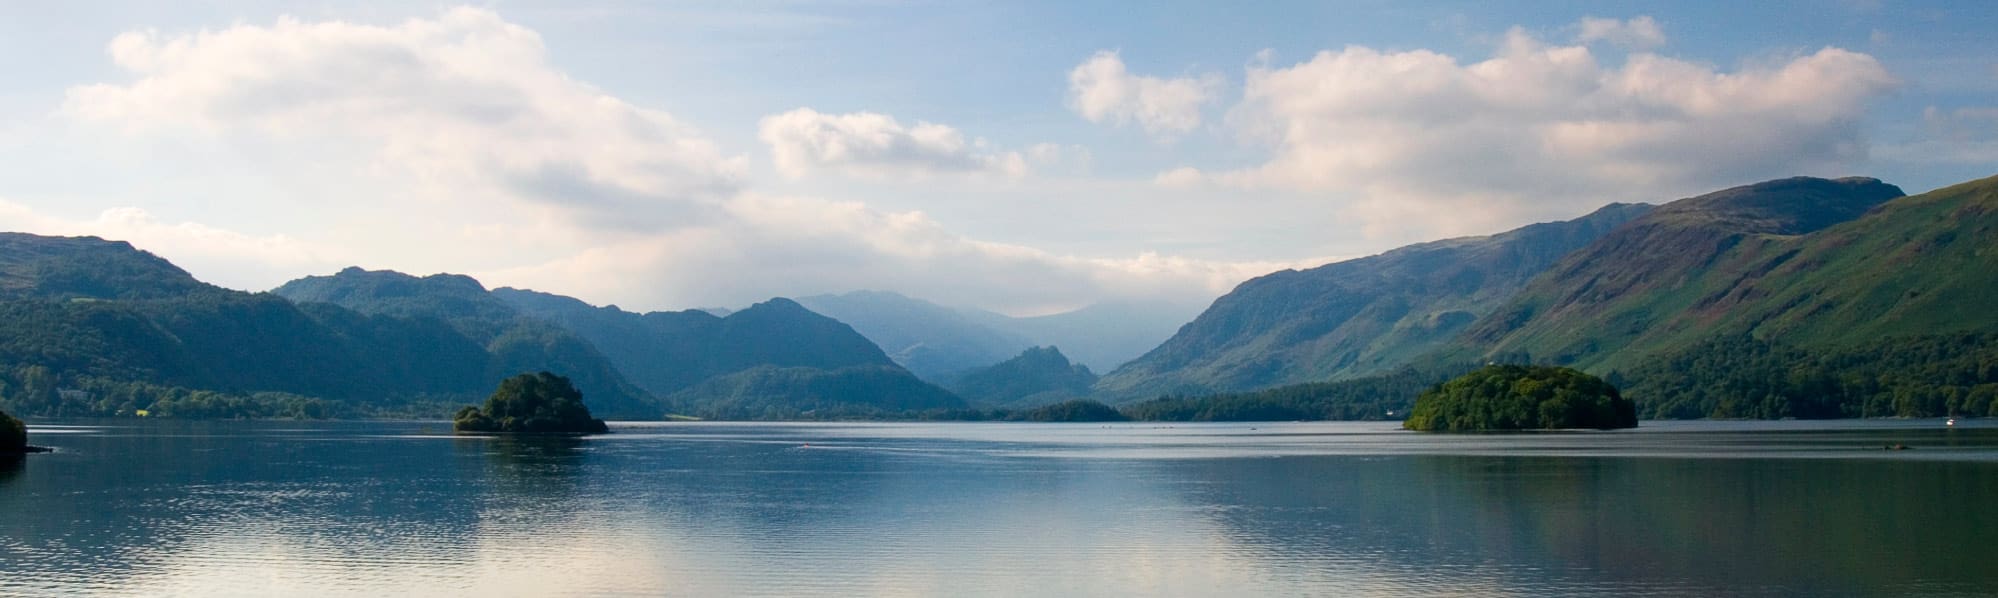 A picture of Cumbrian hills and a lake